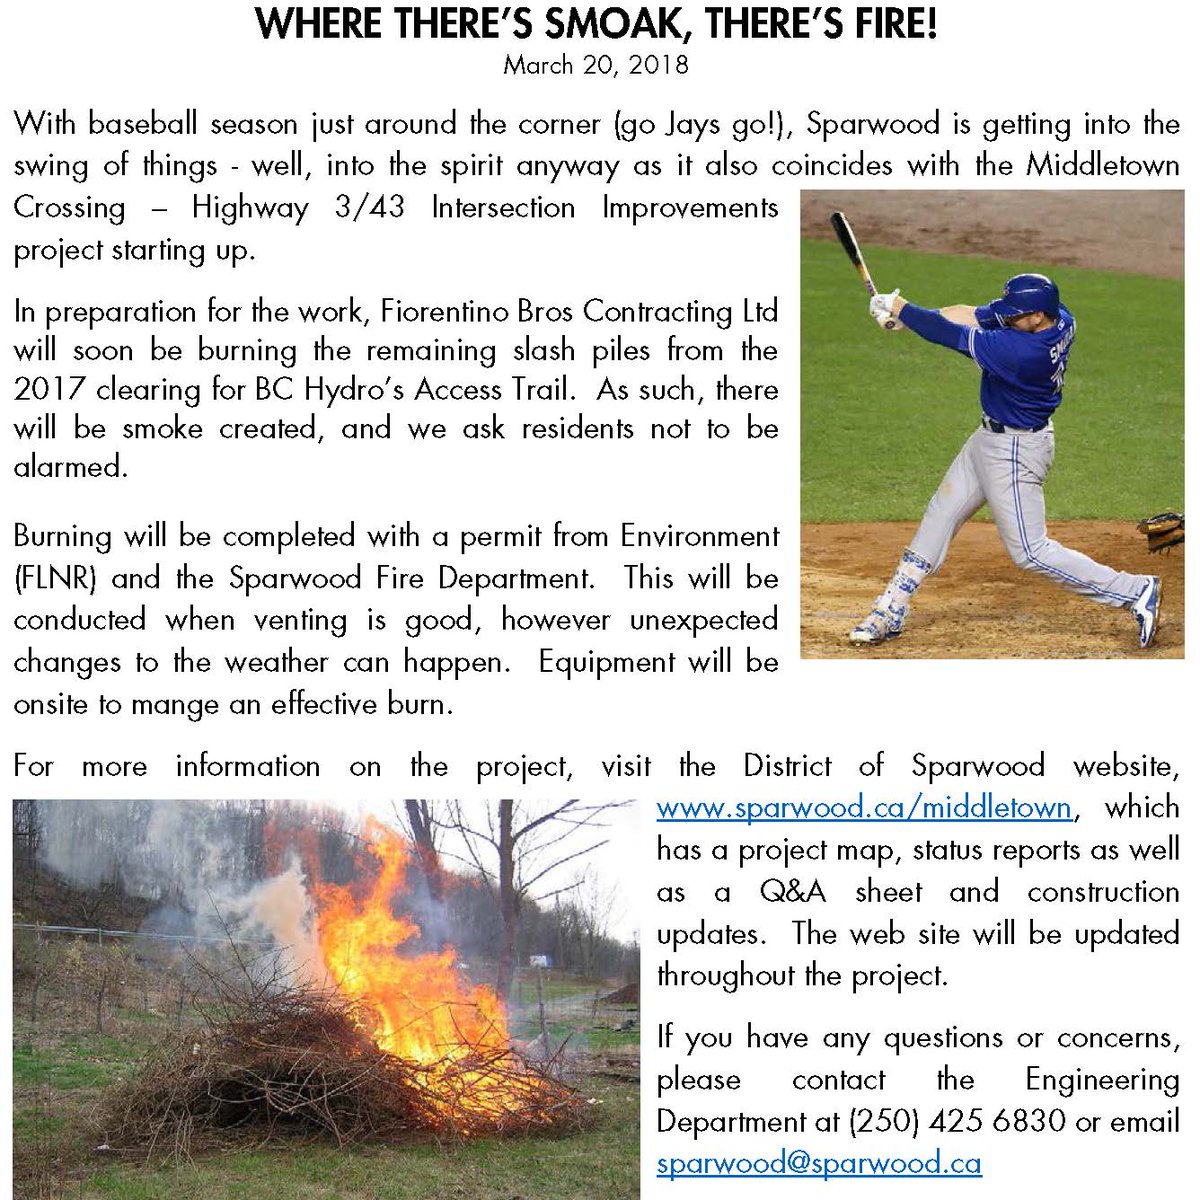 WHERE THERE’S SMOAK, THERE’S FIRE! sparwood.ca/middletown https://t.co/rFHDzkKzb8